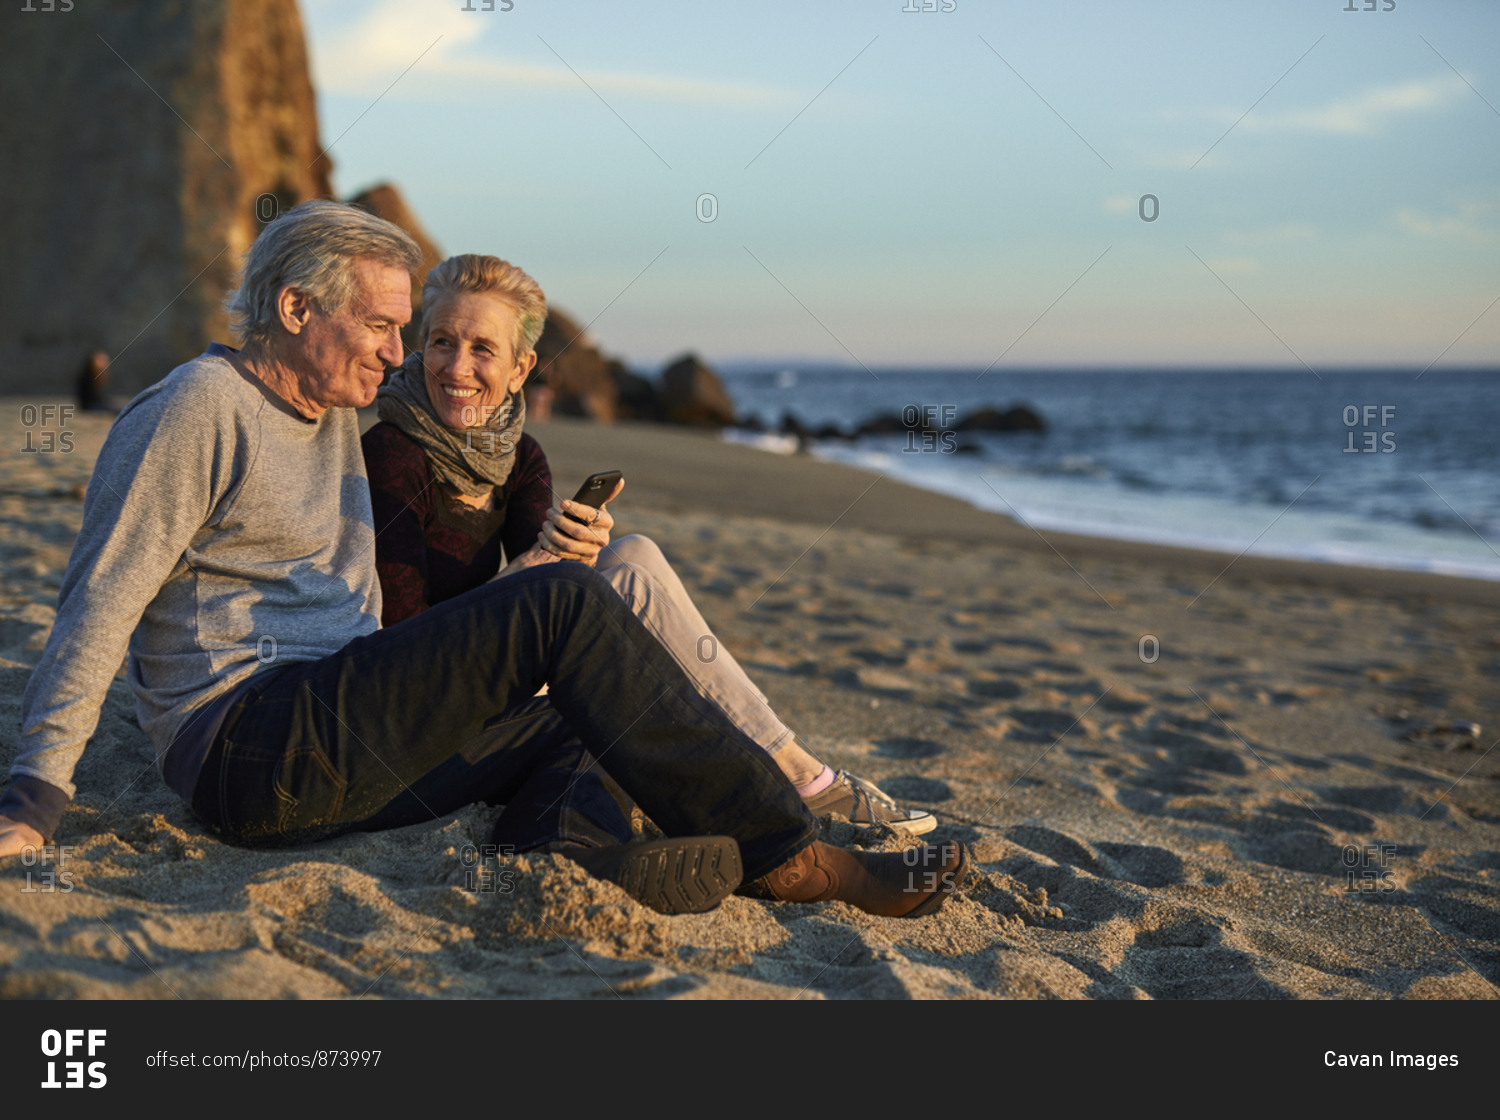 Senior couple using phone while sitting on sand at beach during sunset